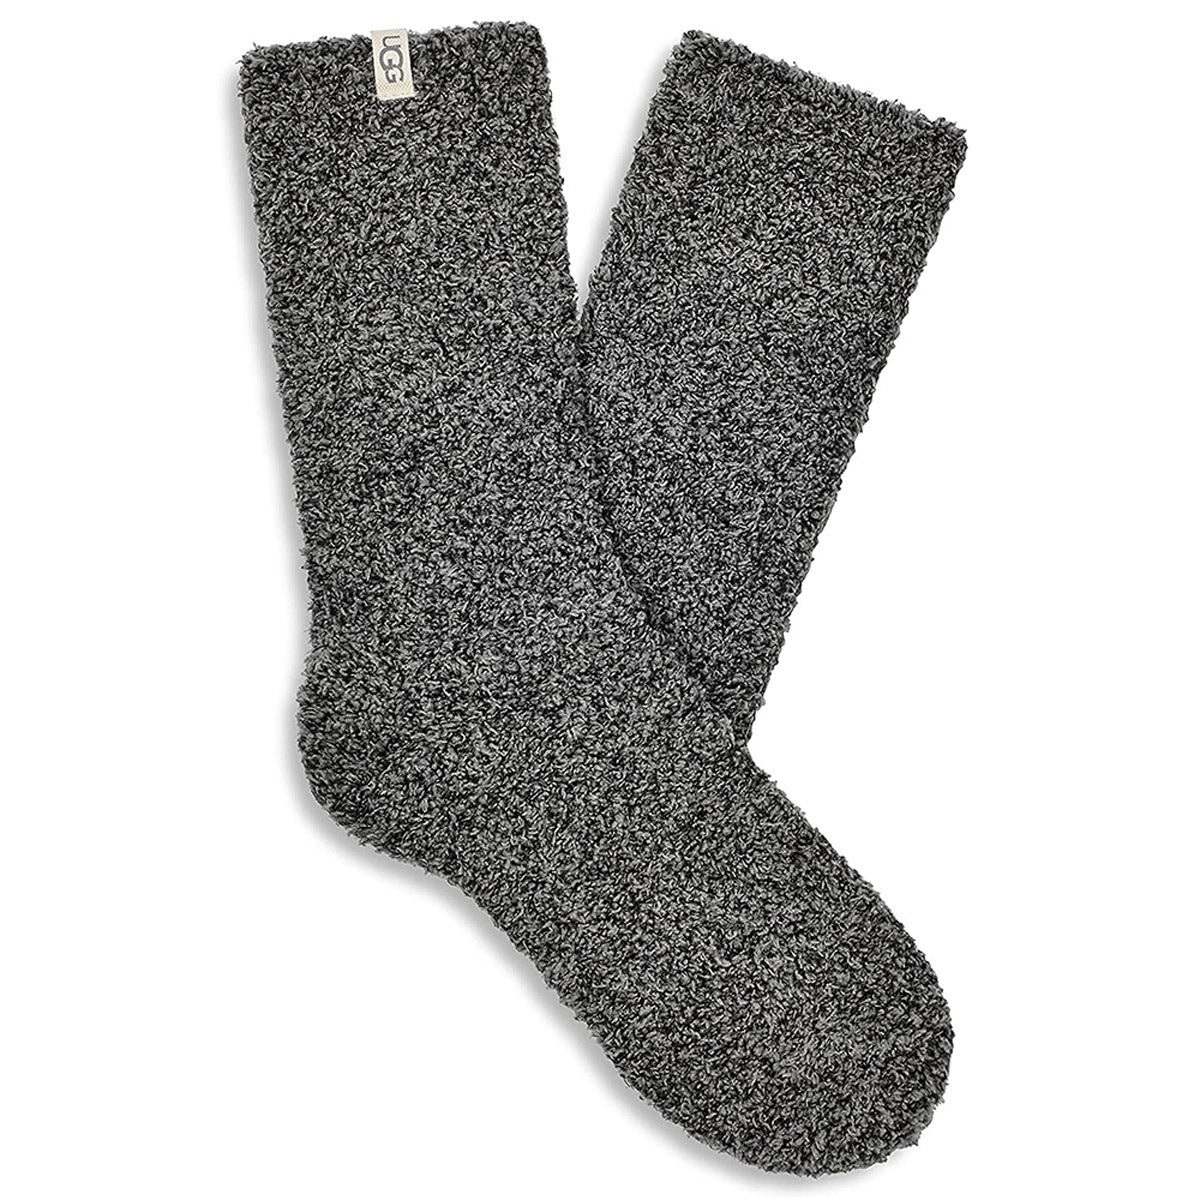 A pair of gray textured UGG Darcy Cozy Charcoal women's socks on a white background. 
Product Name: UGG DARCY COZY SOCKS CHARCOAL - WOMENS
Brand Name: Ugg